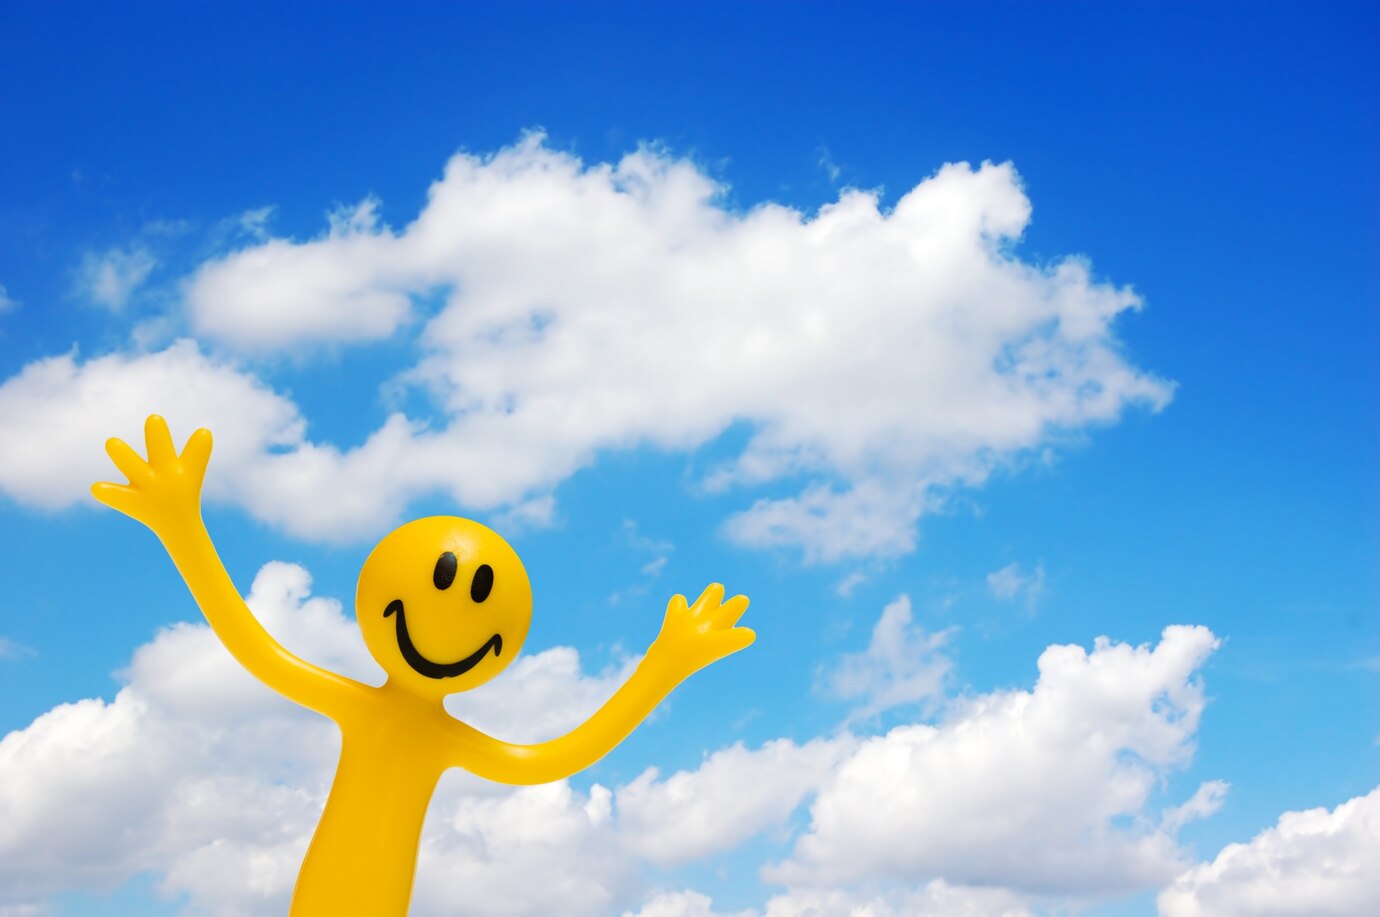 smiling-character-with-sky-background_1160-292.jpg